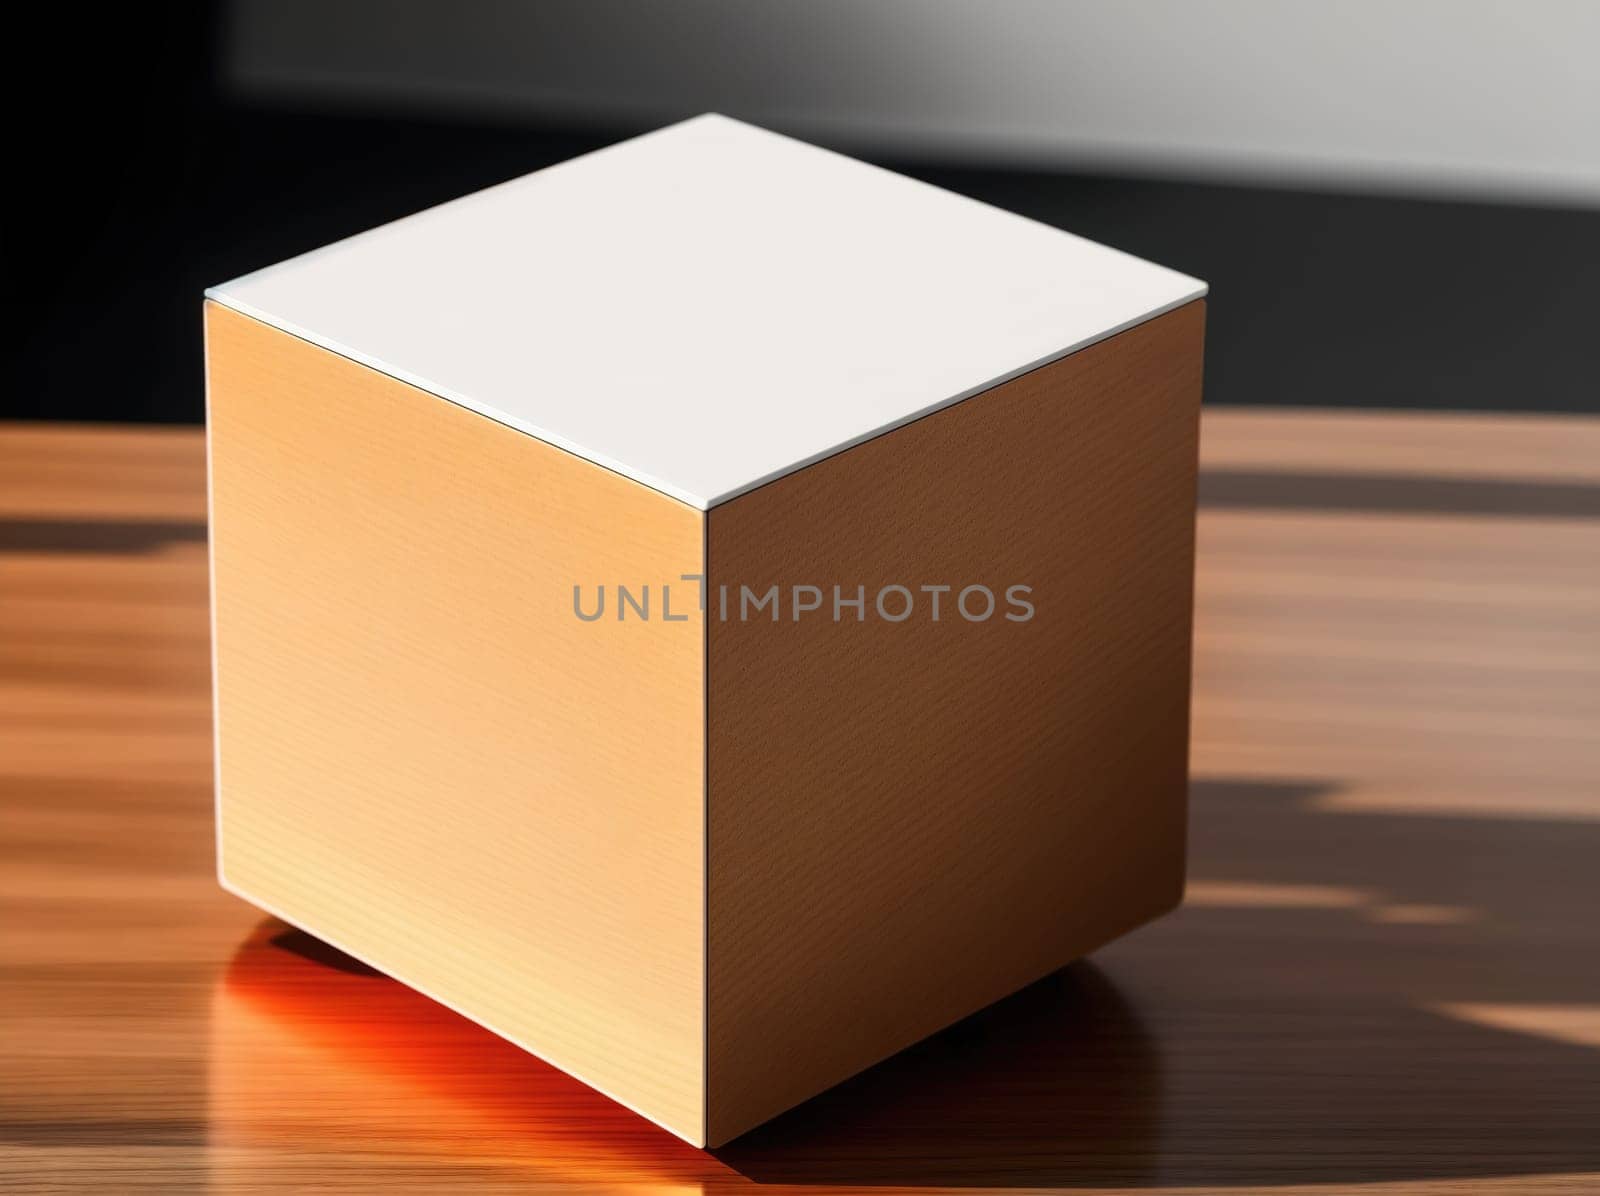 The image is a 3D rendering of a cube on a wooden table.